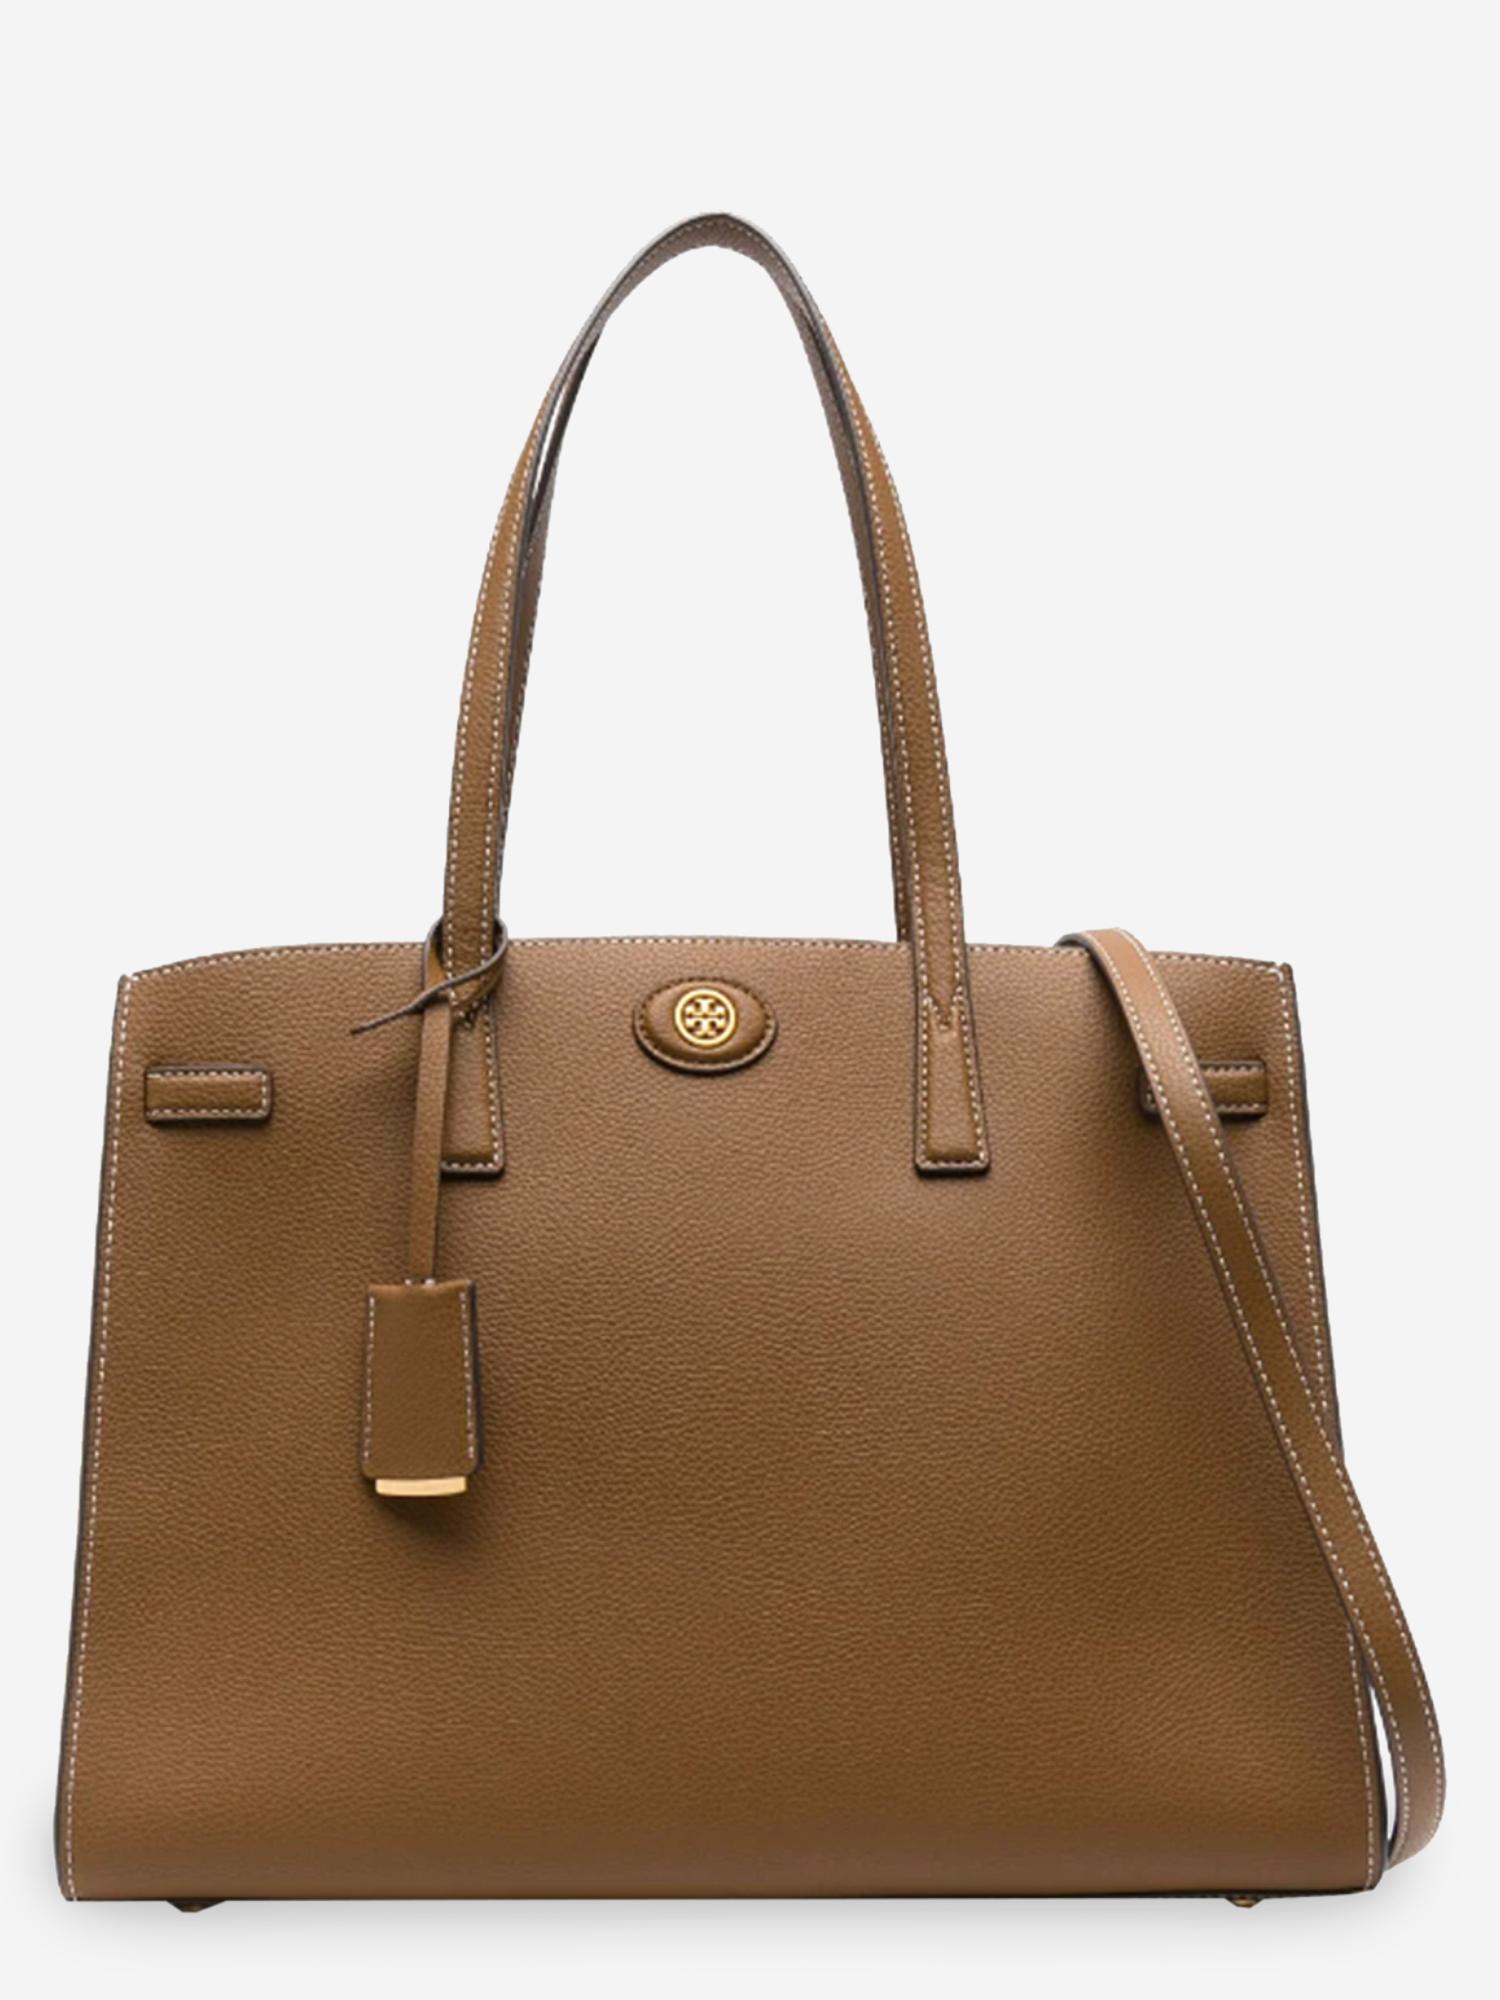 NWT Authentic TORY BURCH BLAKE Brown Leather Large Tote & Pouch | eBay